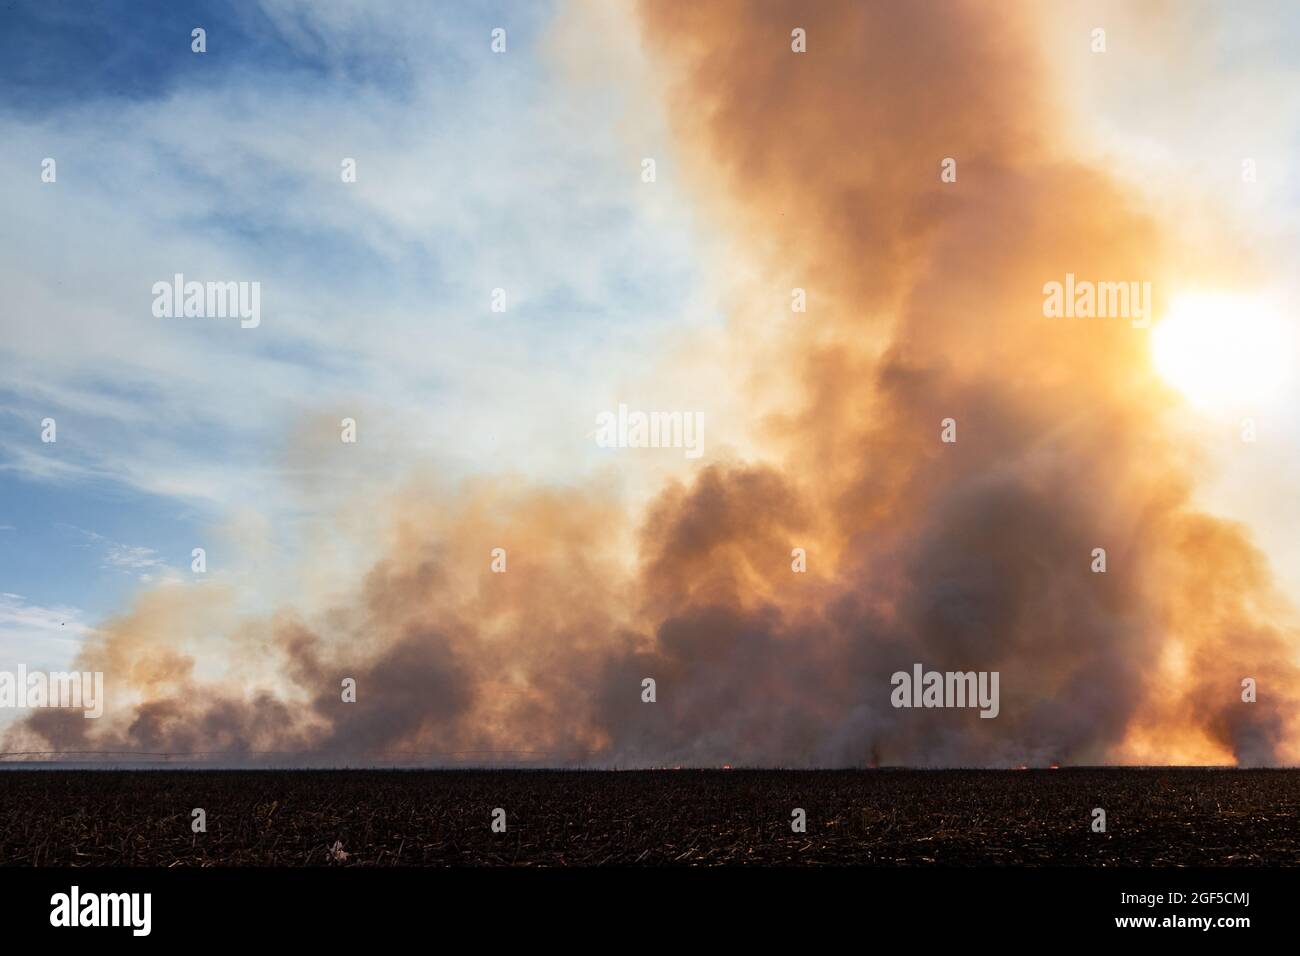 A wide angle of an agricultural field on fire, agriculture and farming field burning, wildfire smoke filling the sky at sunset, daytime Stock Photo